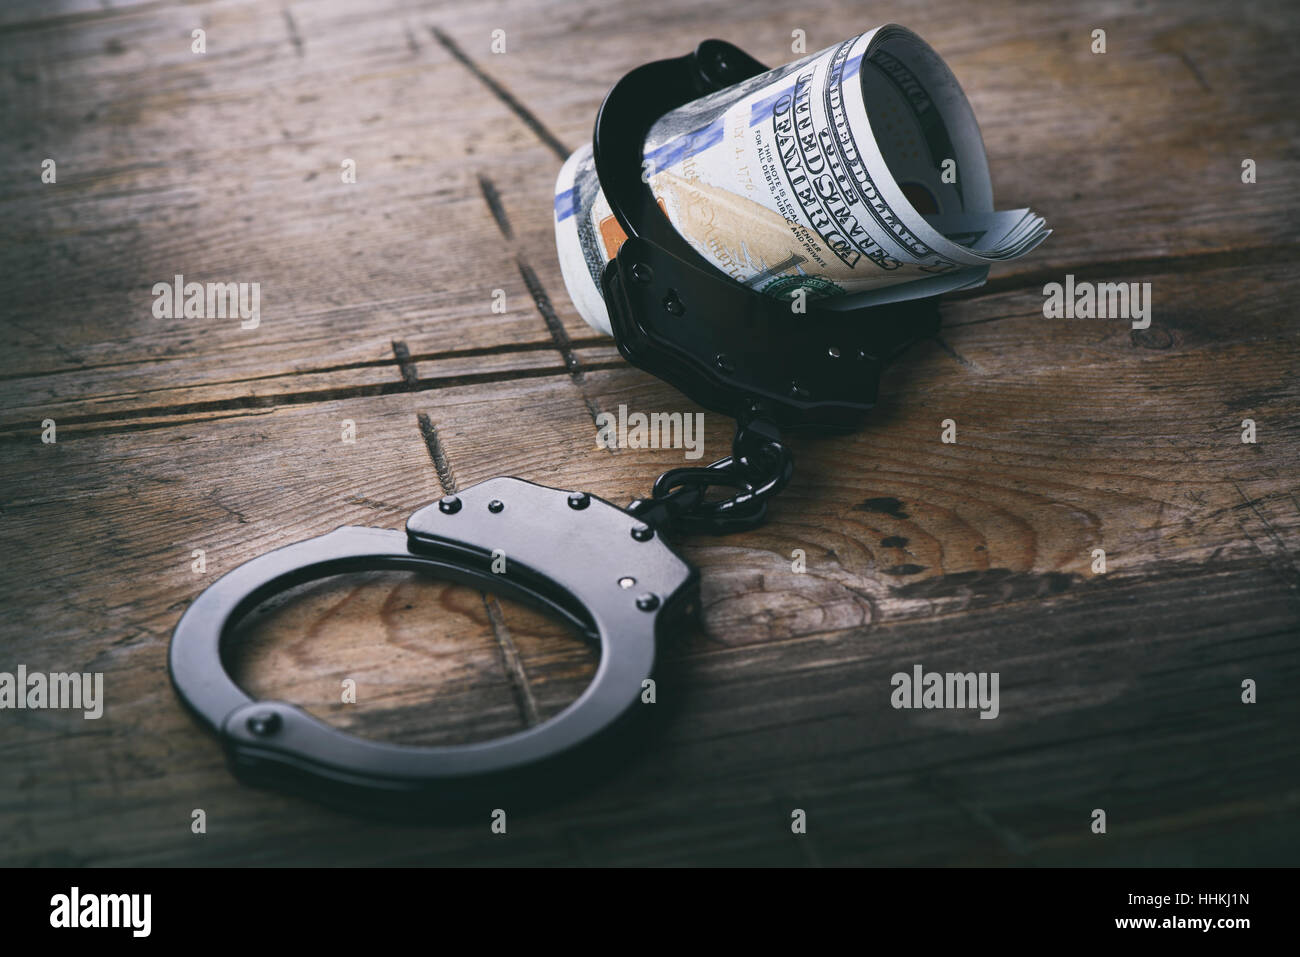 Handcuffs with money on wooden background. US currency Stock Photo